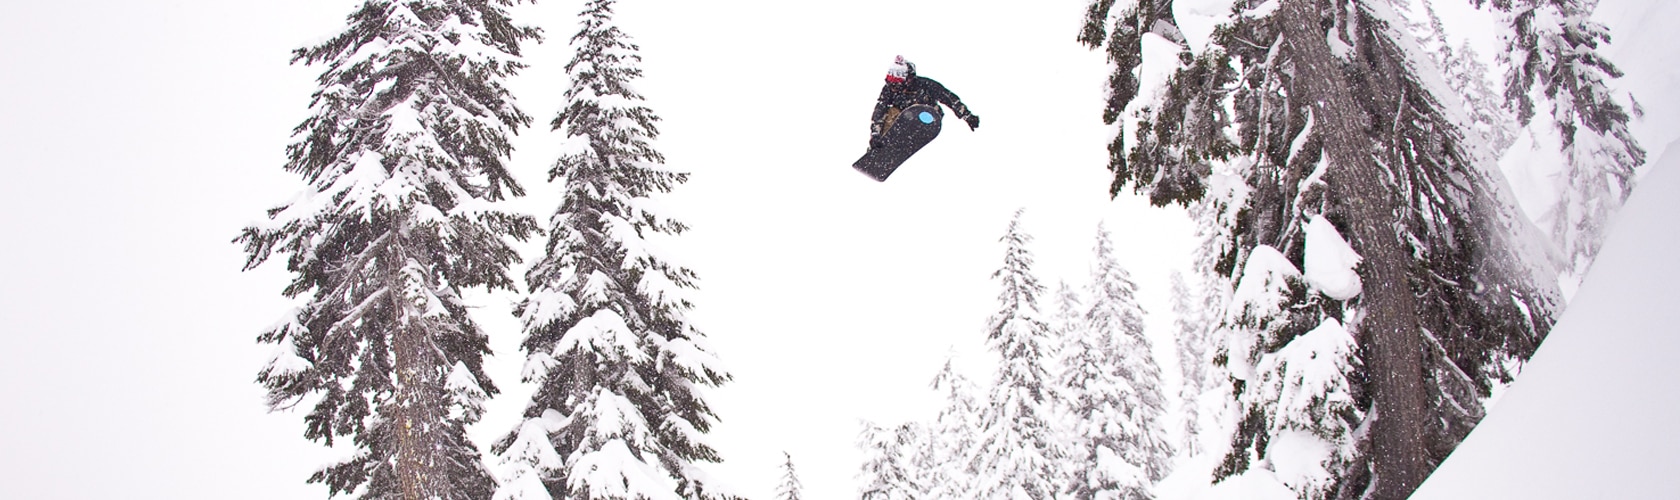 snowboarder getting huge air down mountain with snow covered trees in the background